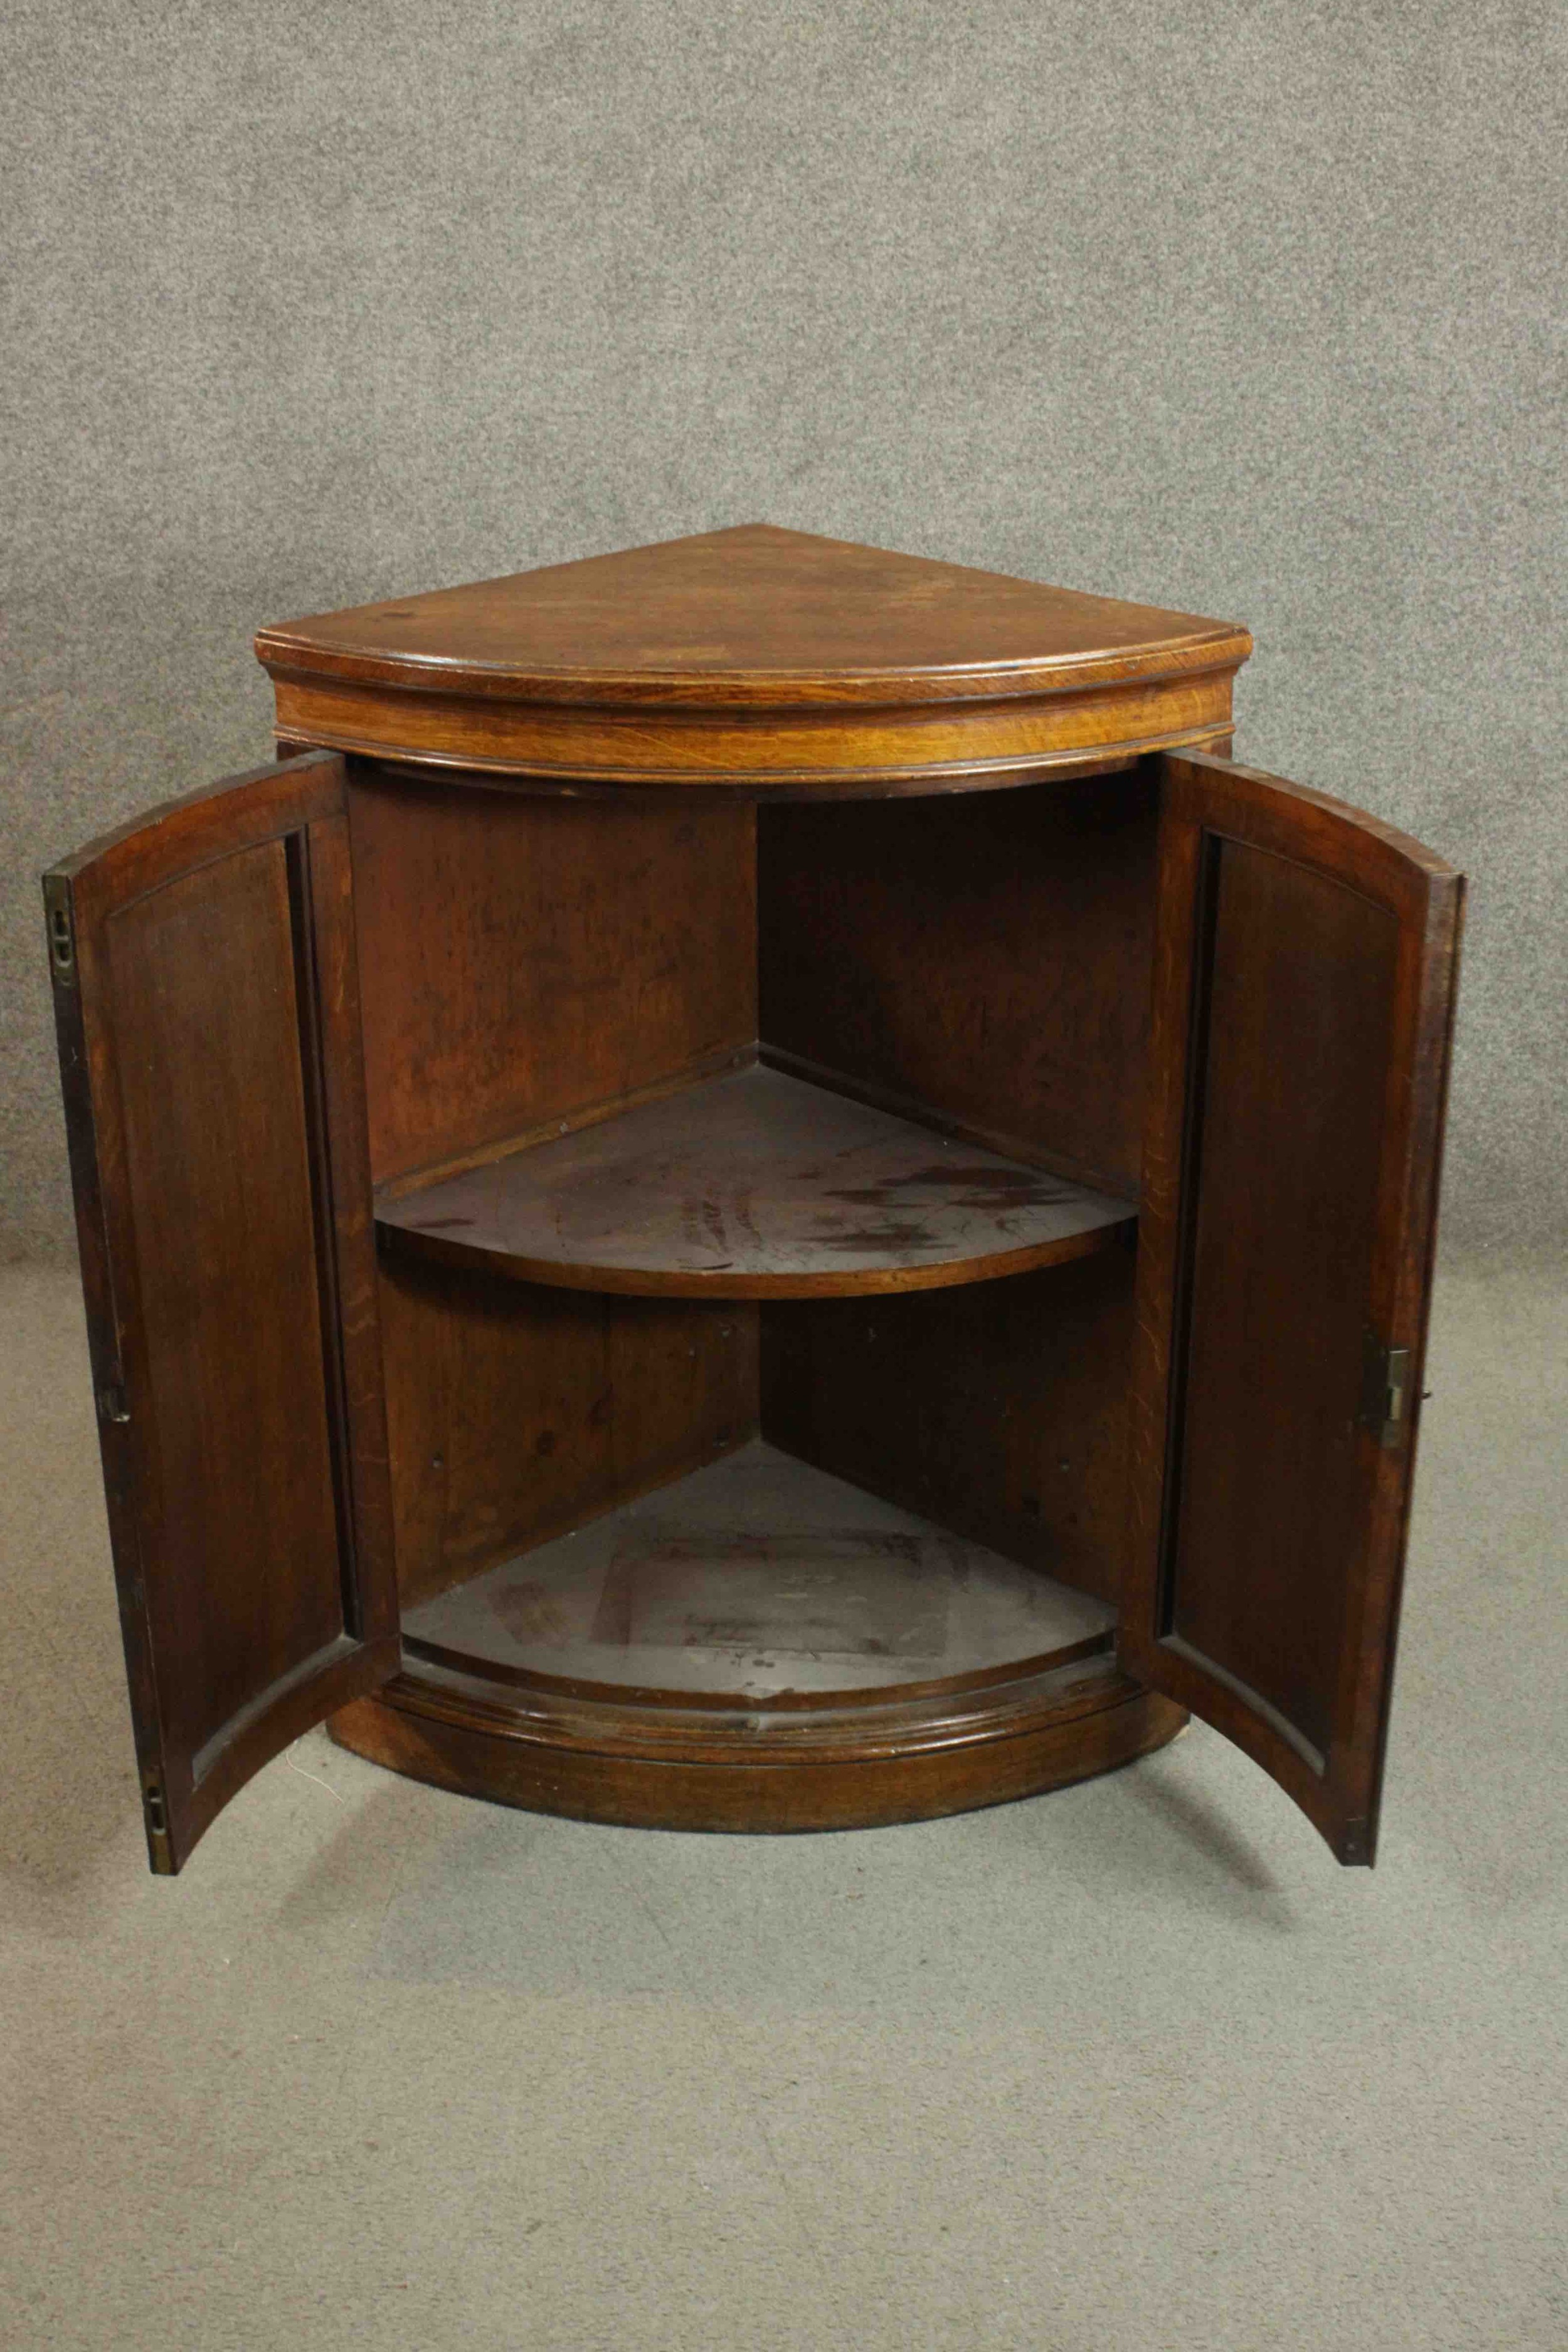 A 19th century oak bow fronted corner cabinet, with two doors opening to reveal a shelf on a - Image 4 of 7